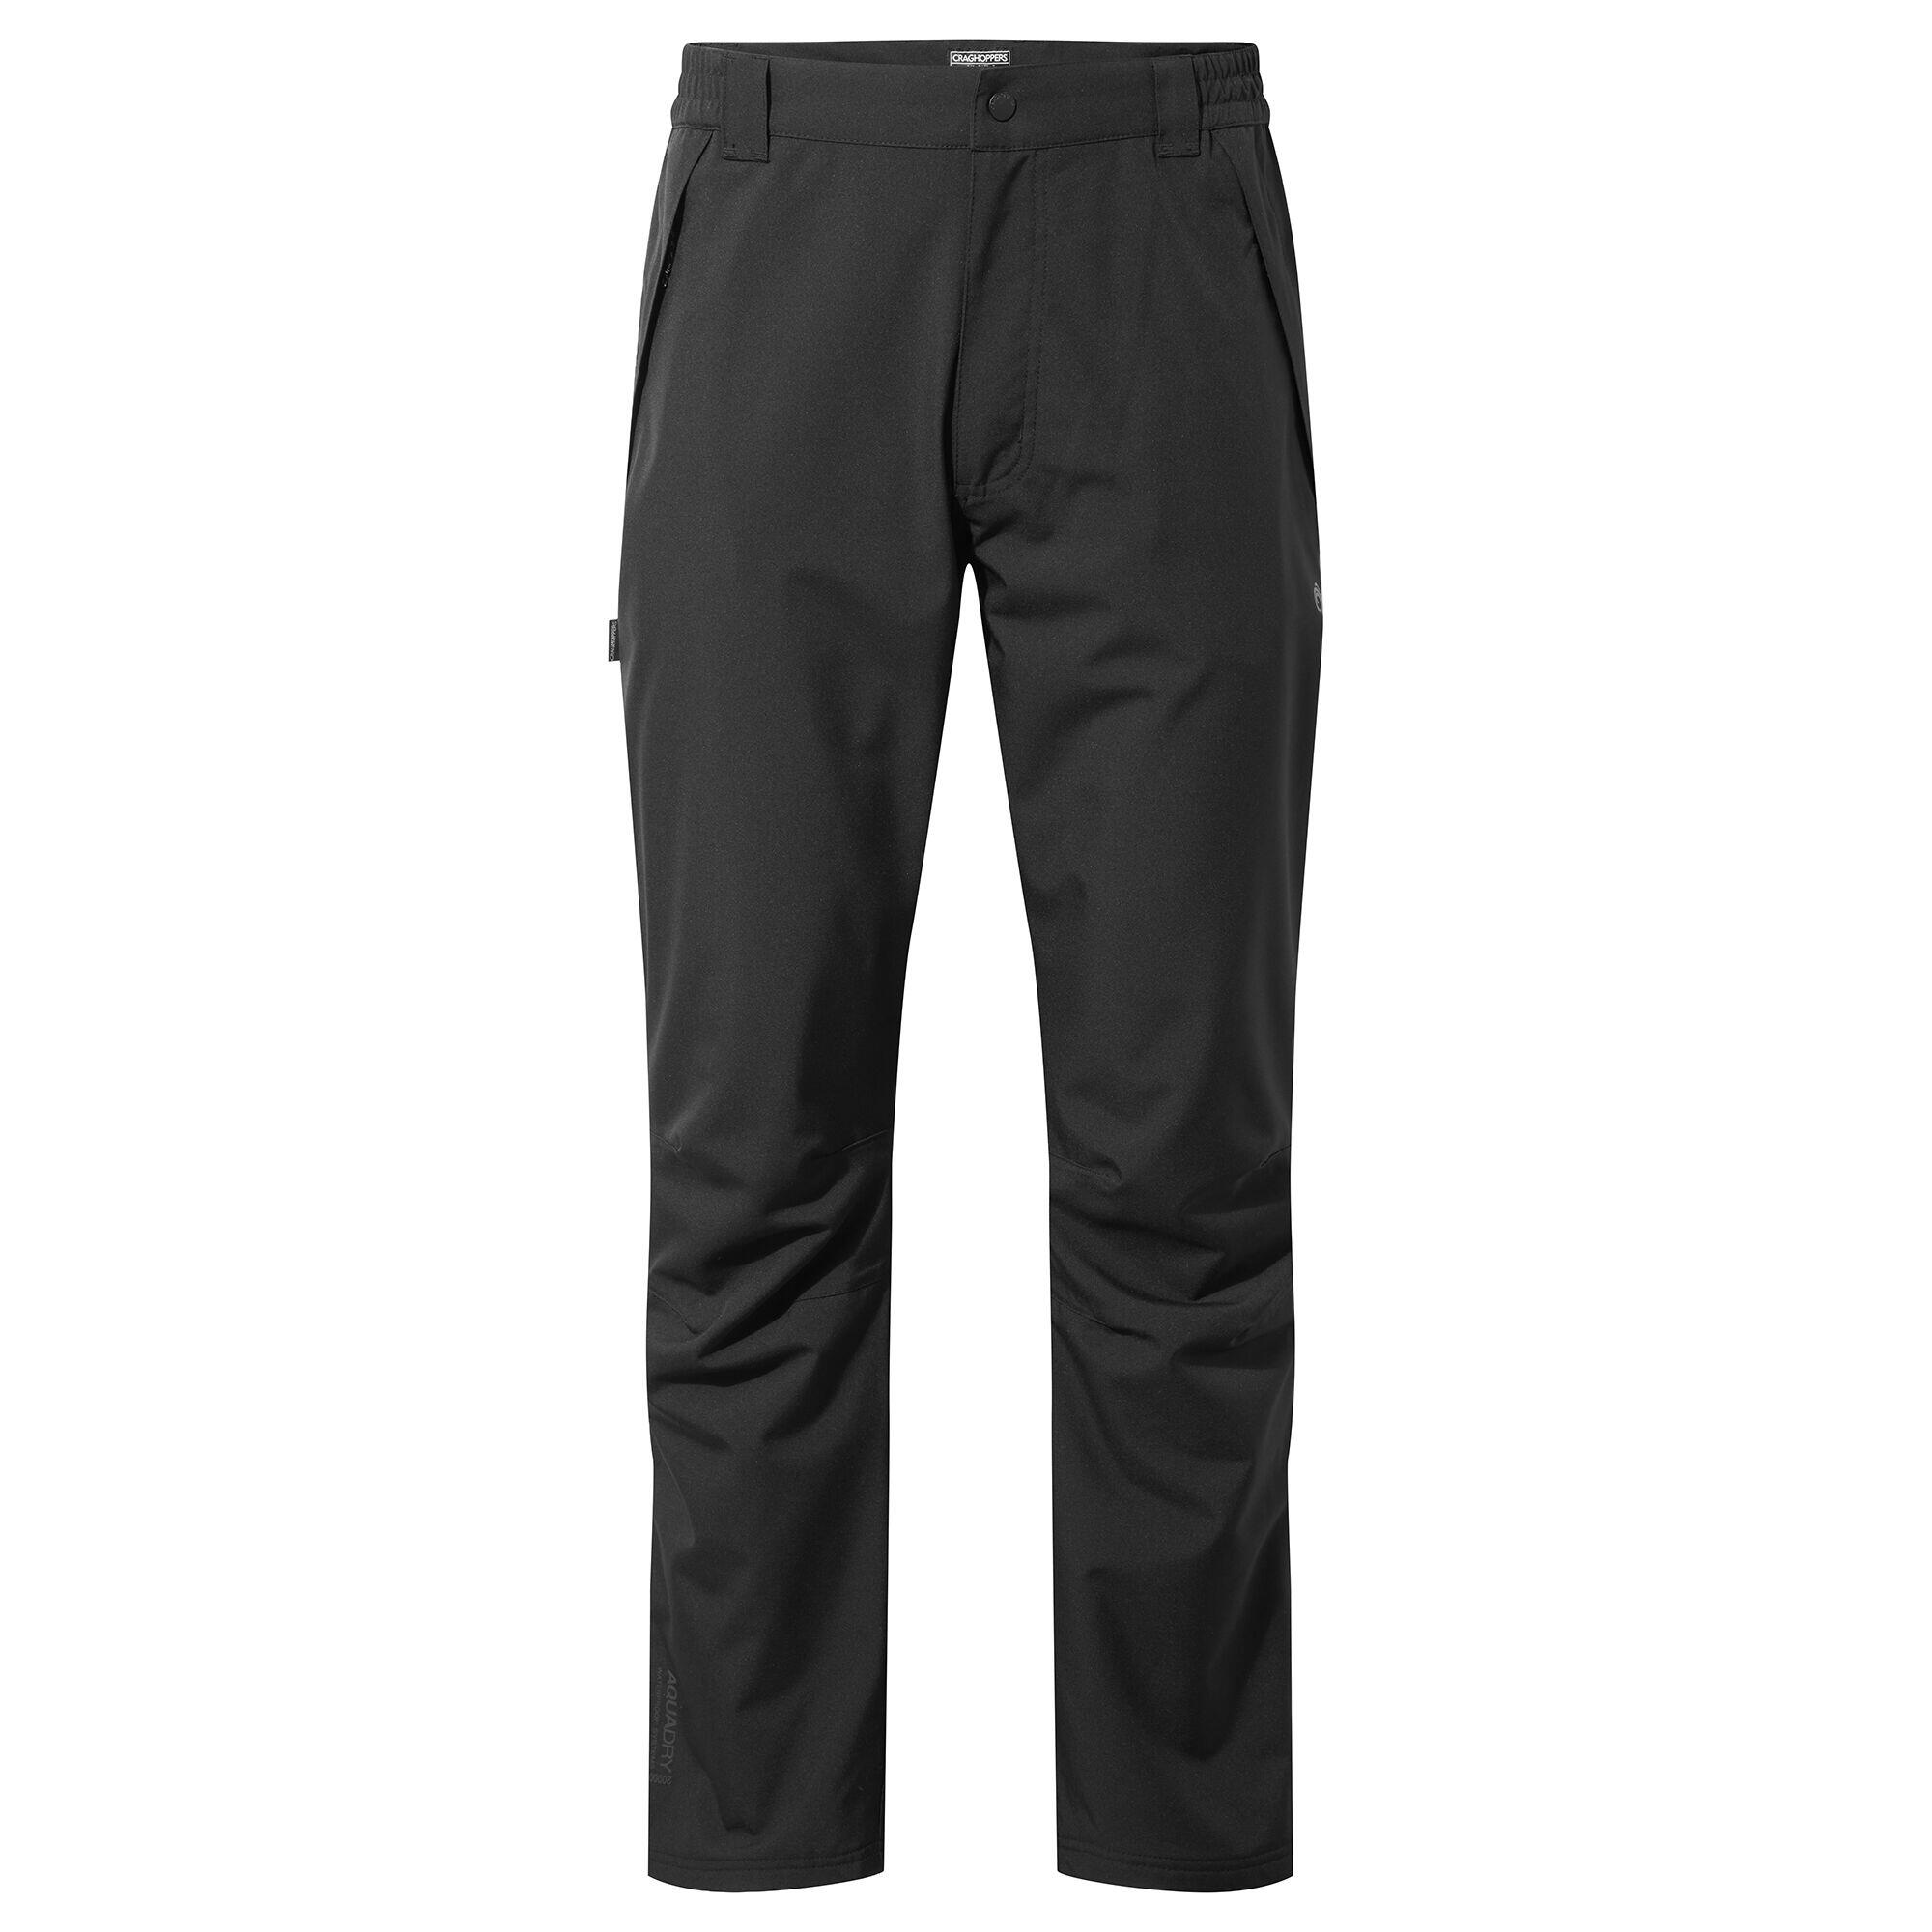 CRAGHOPPERS Men's Expert Kiwi Waterproof Thermo Trousers